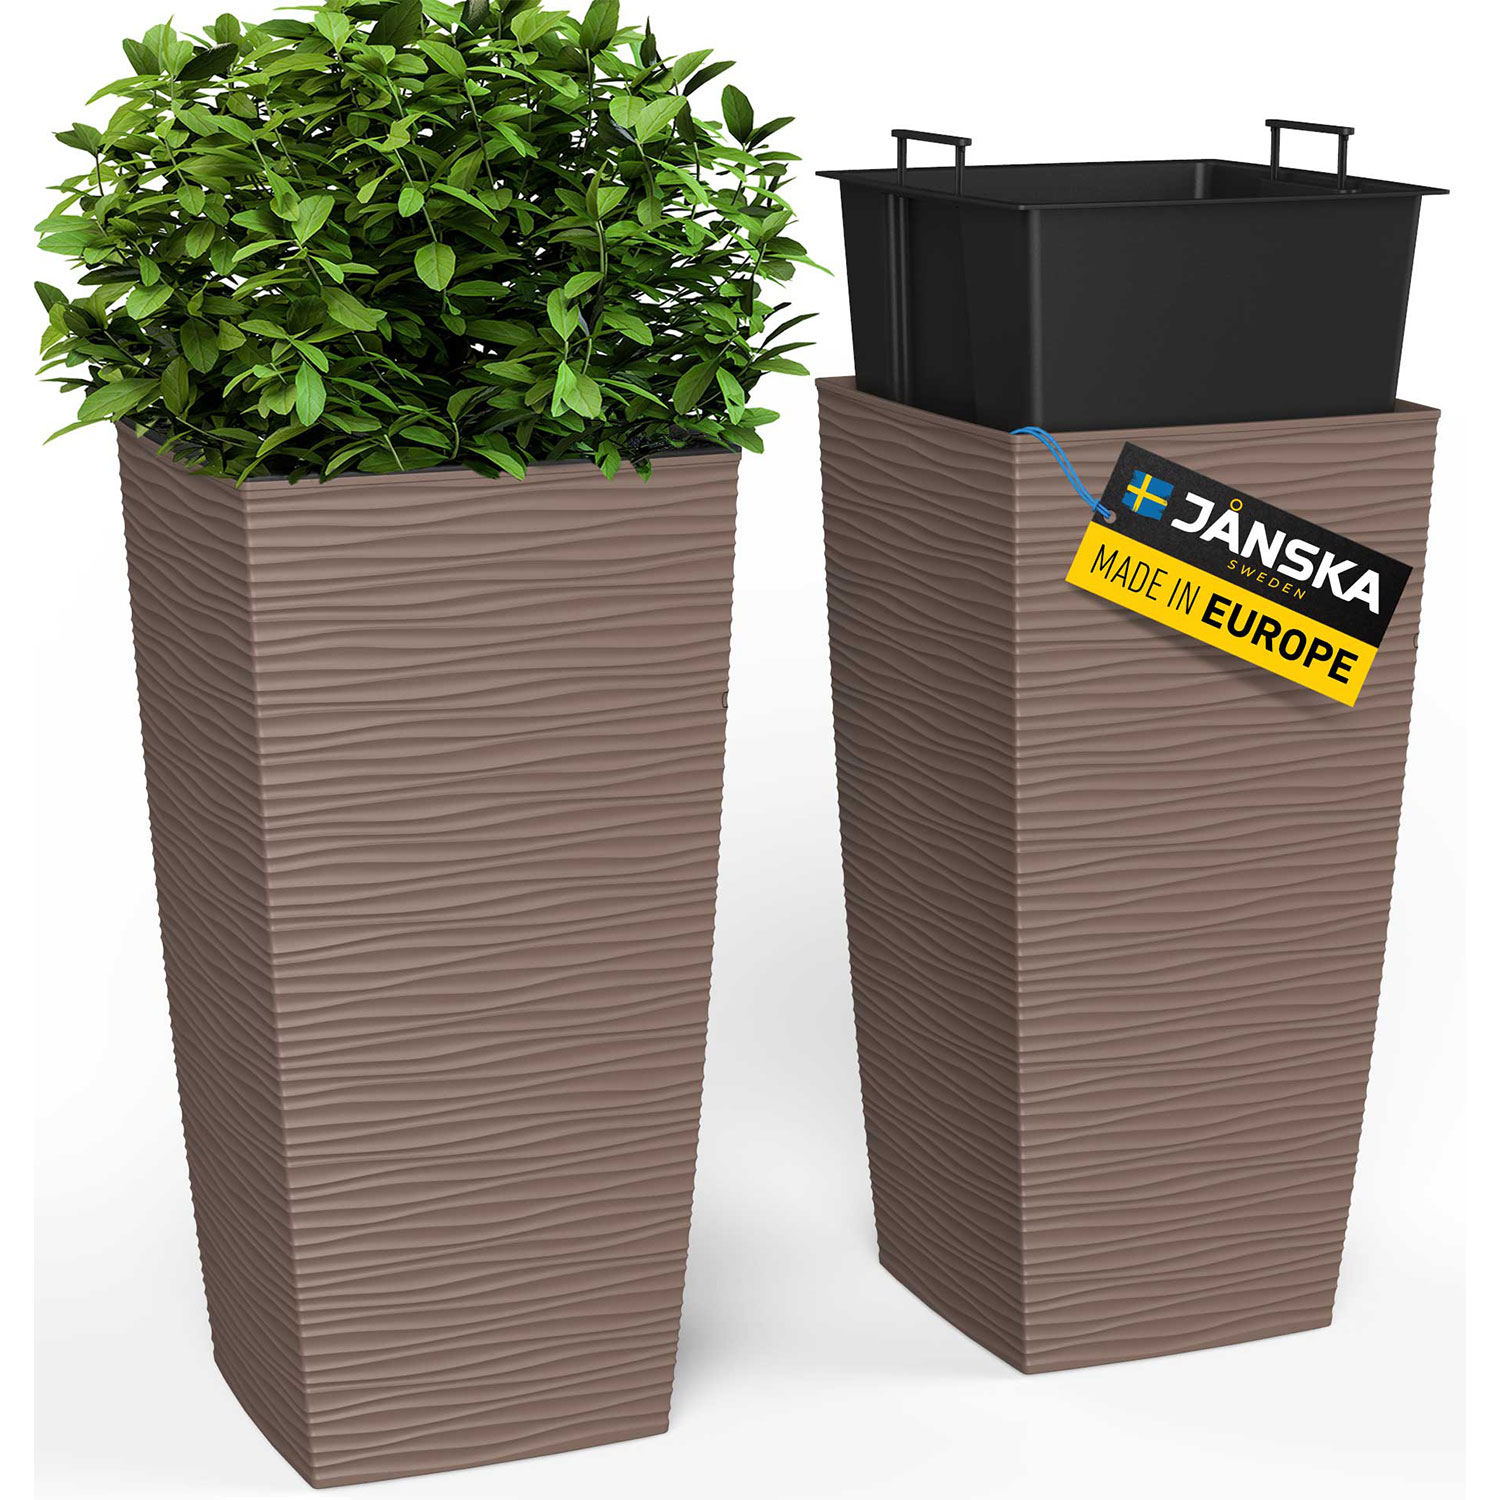 00a-Evergreen-Flower-planters-pots-NEW-mocca-UPLOAD